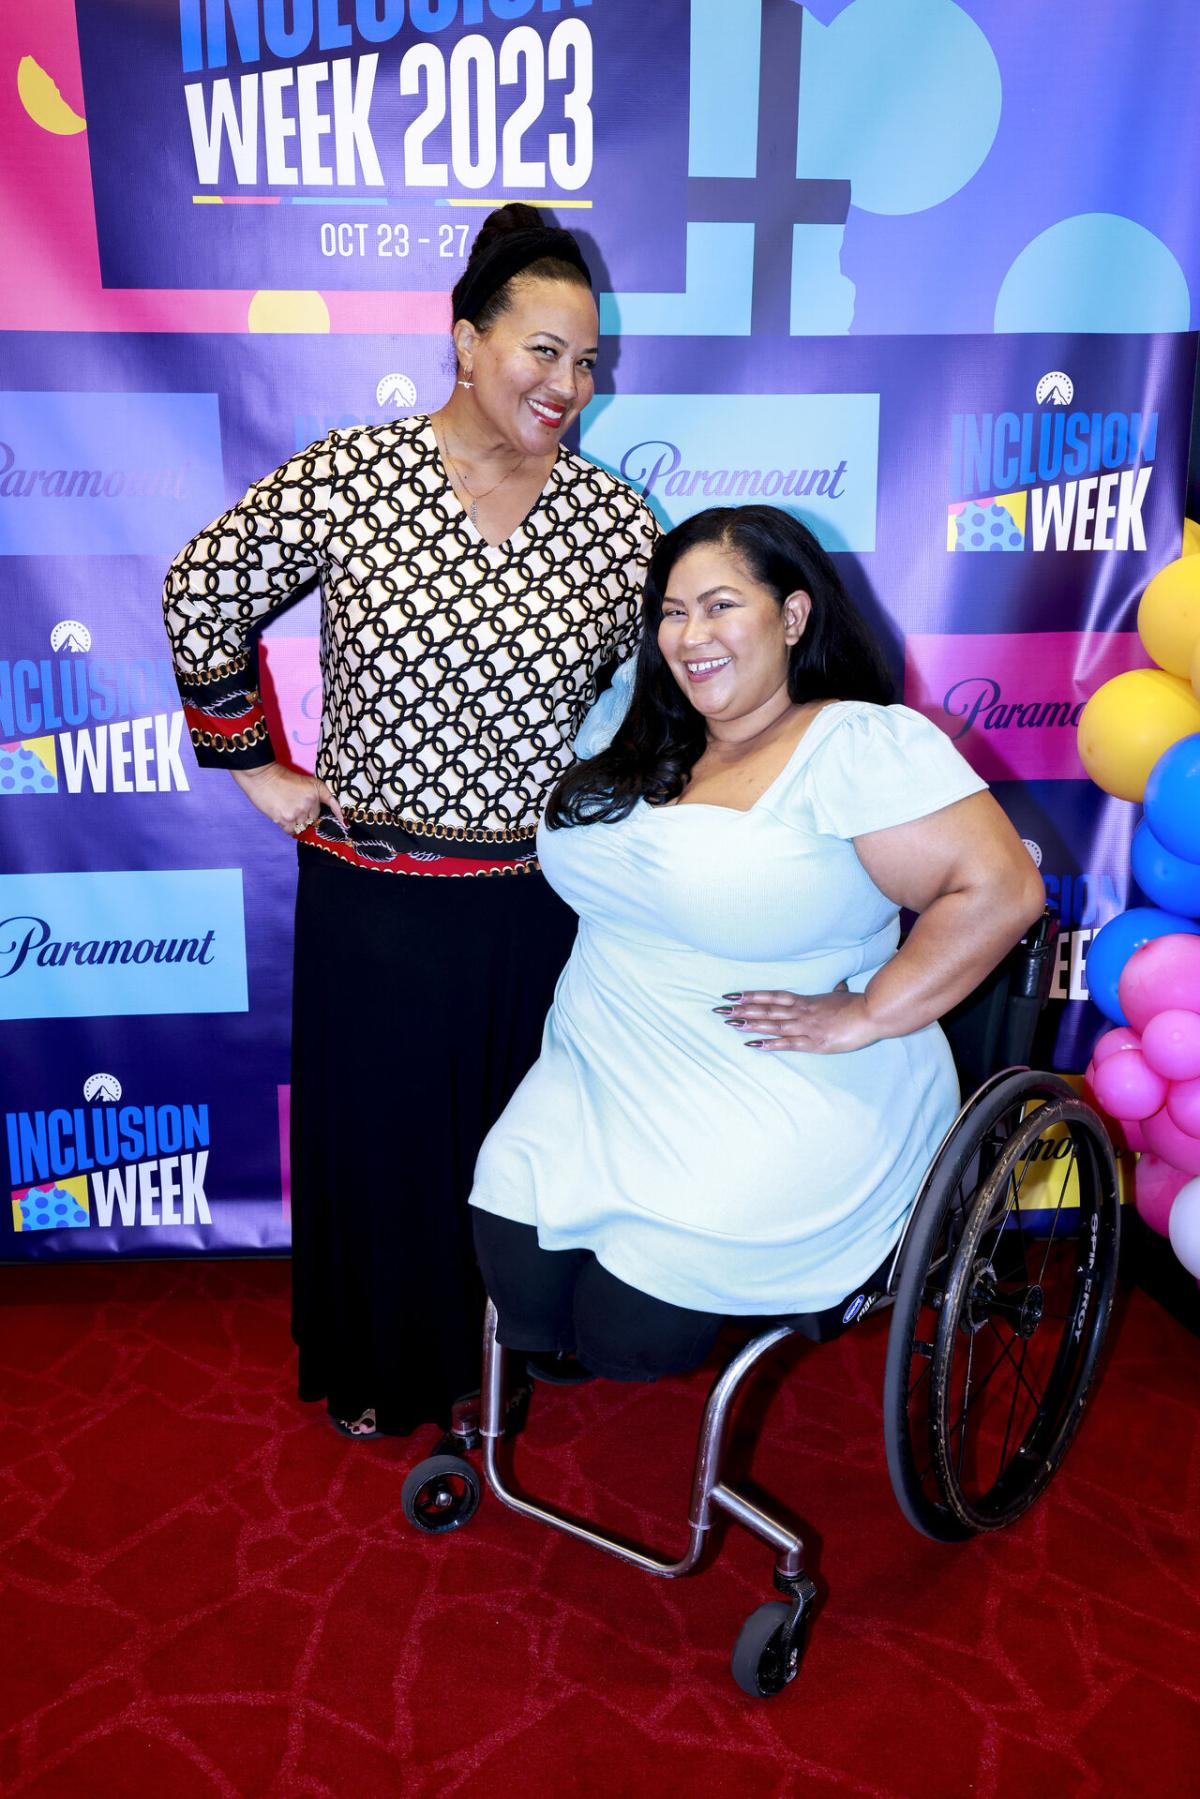 Two people pose on a red carpet. "Inclusion Week 2023" behind them.